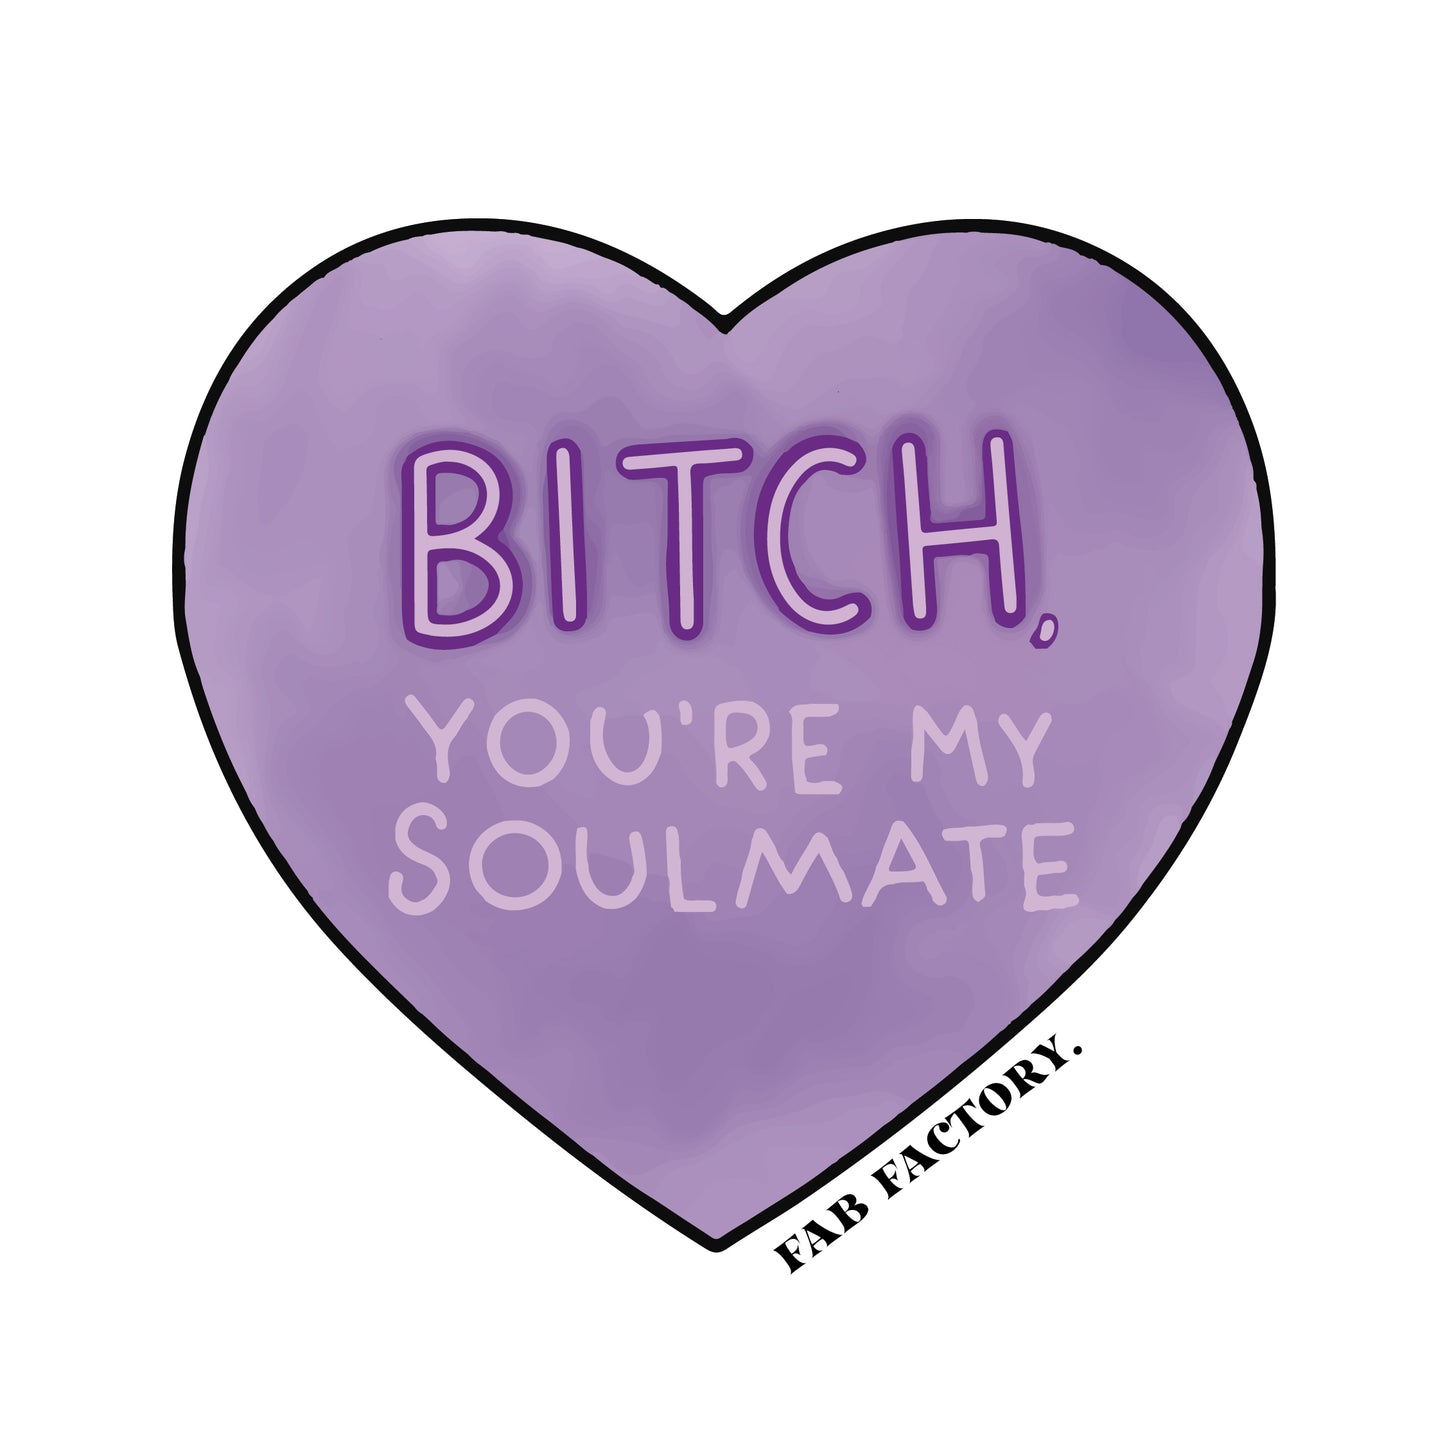 B* you are my soulmate